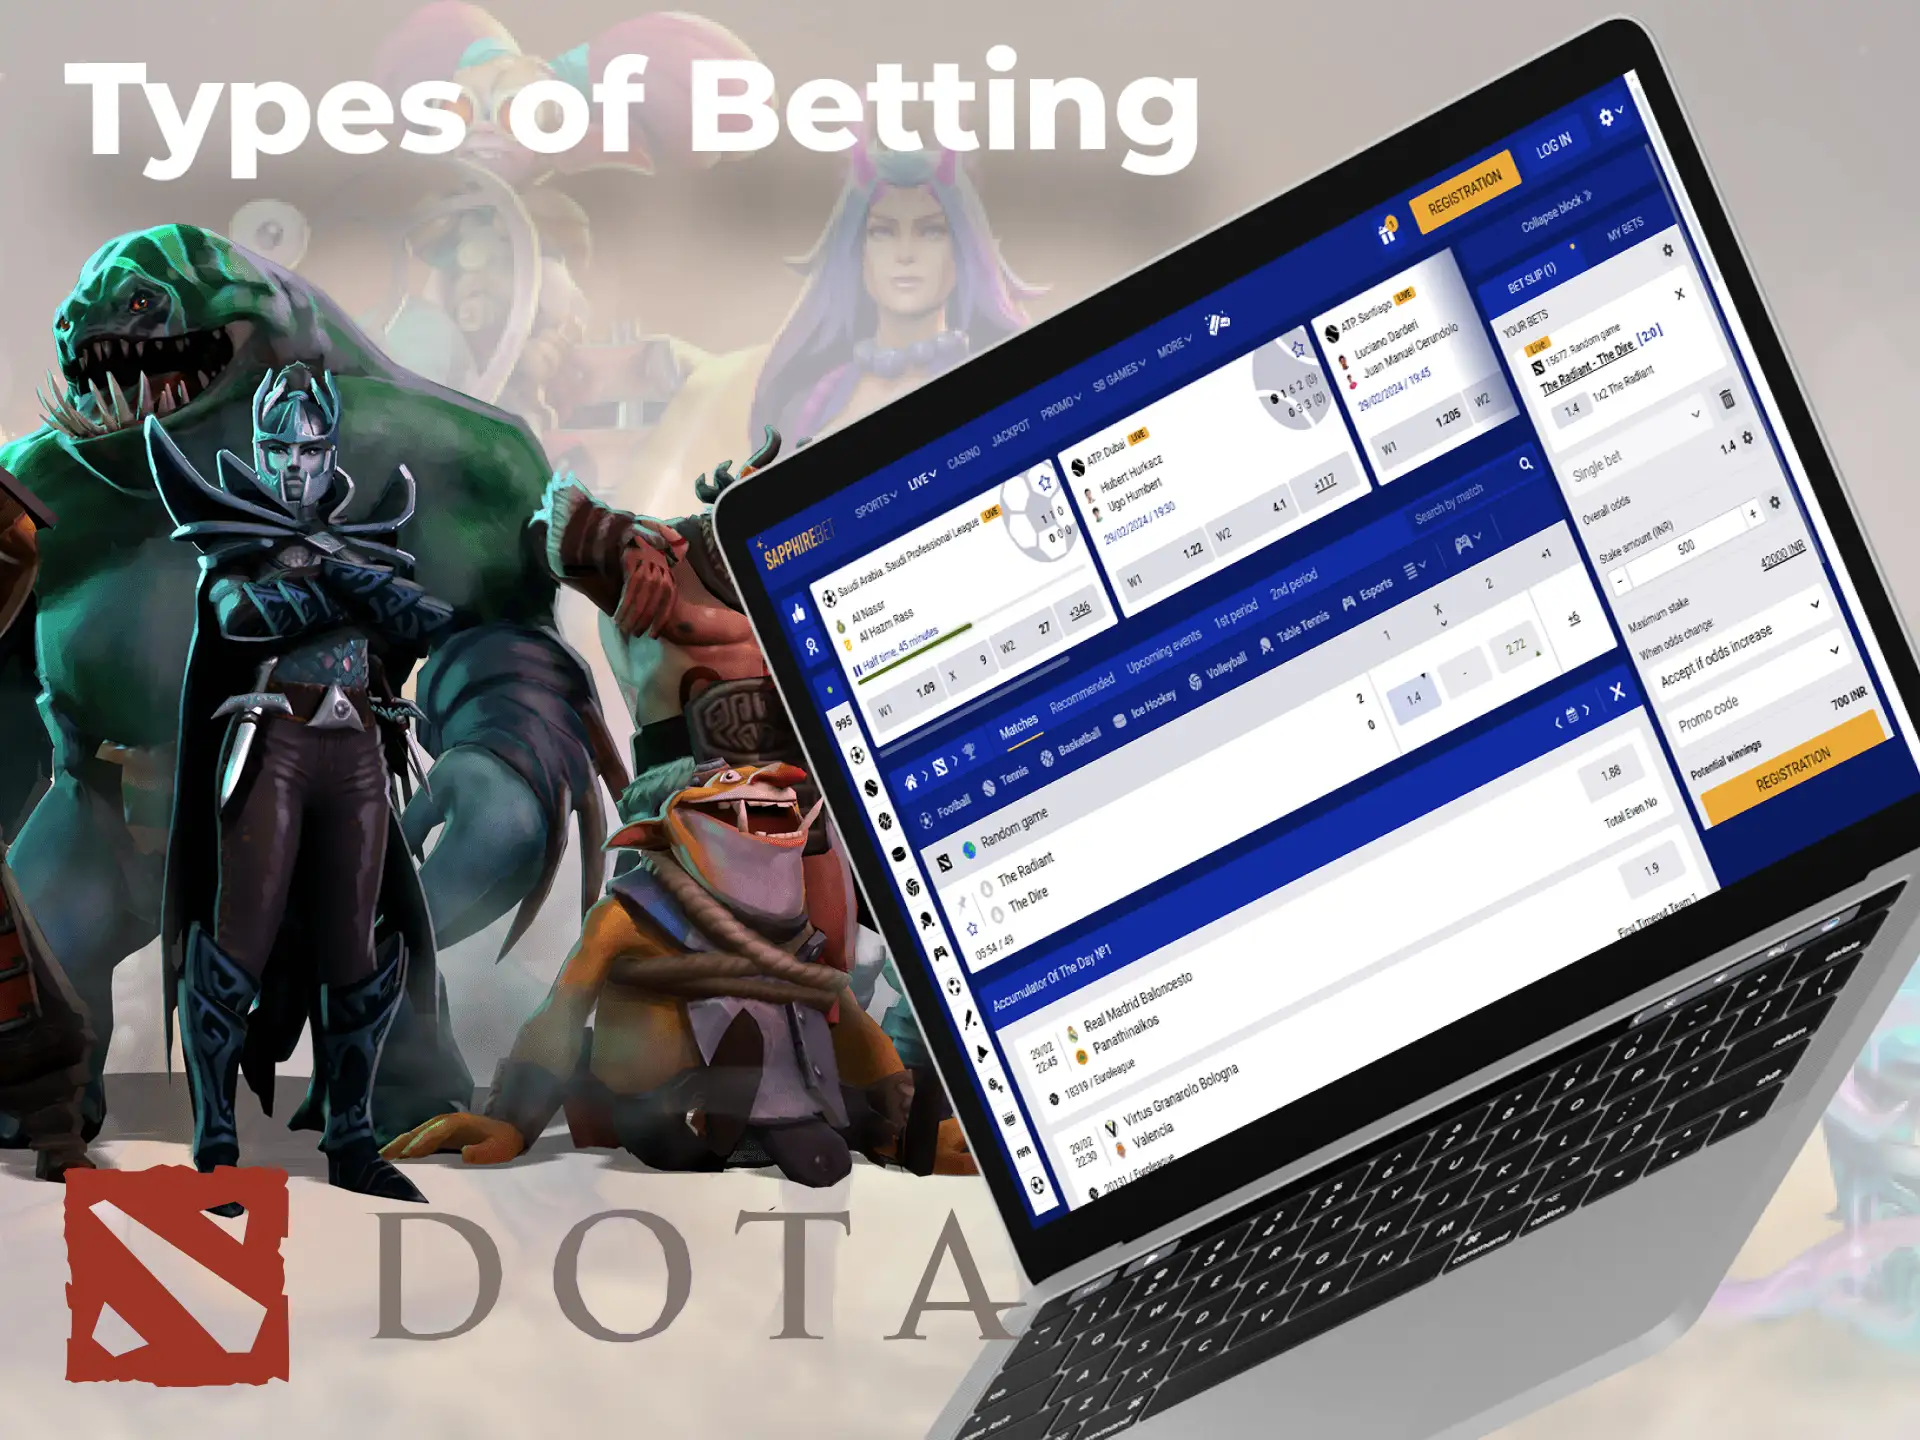 Bookmakers offer different types of bets on Dota 2.